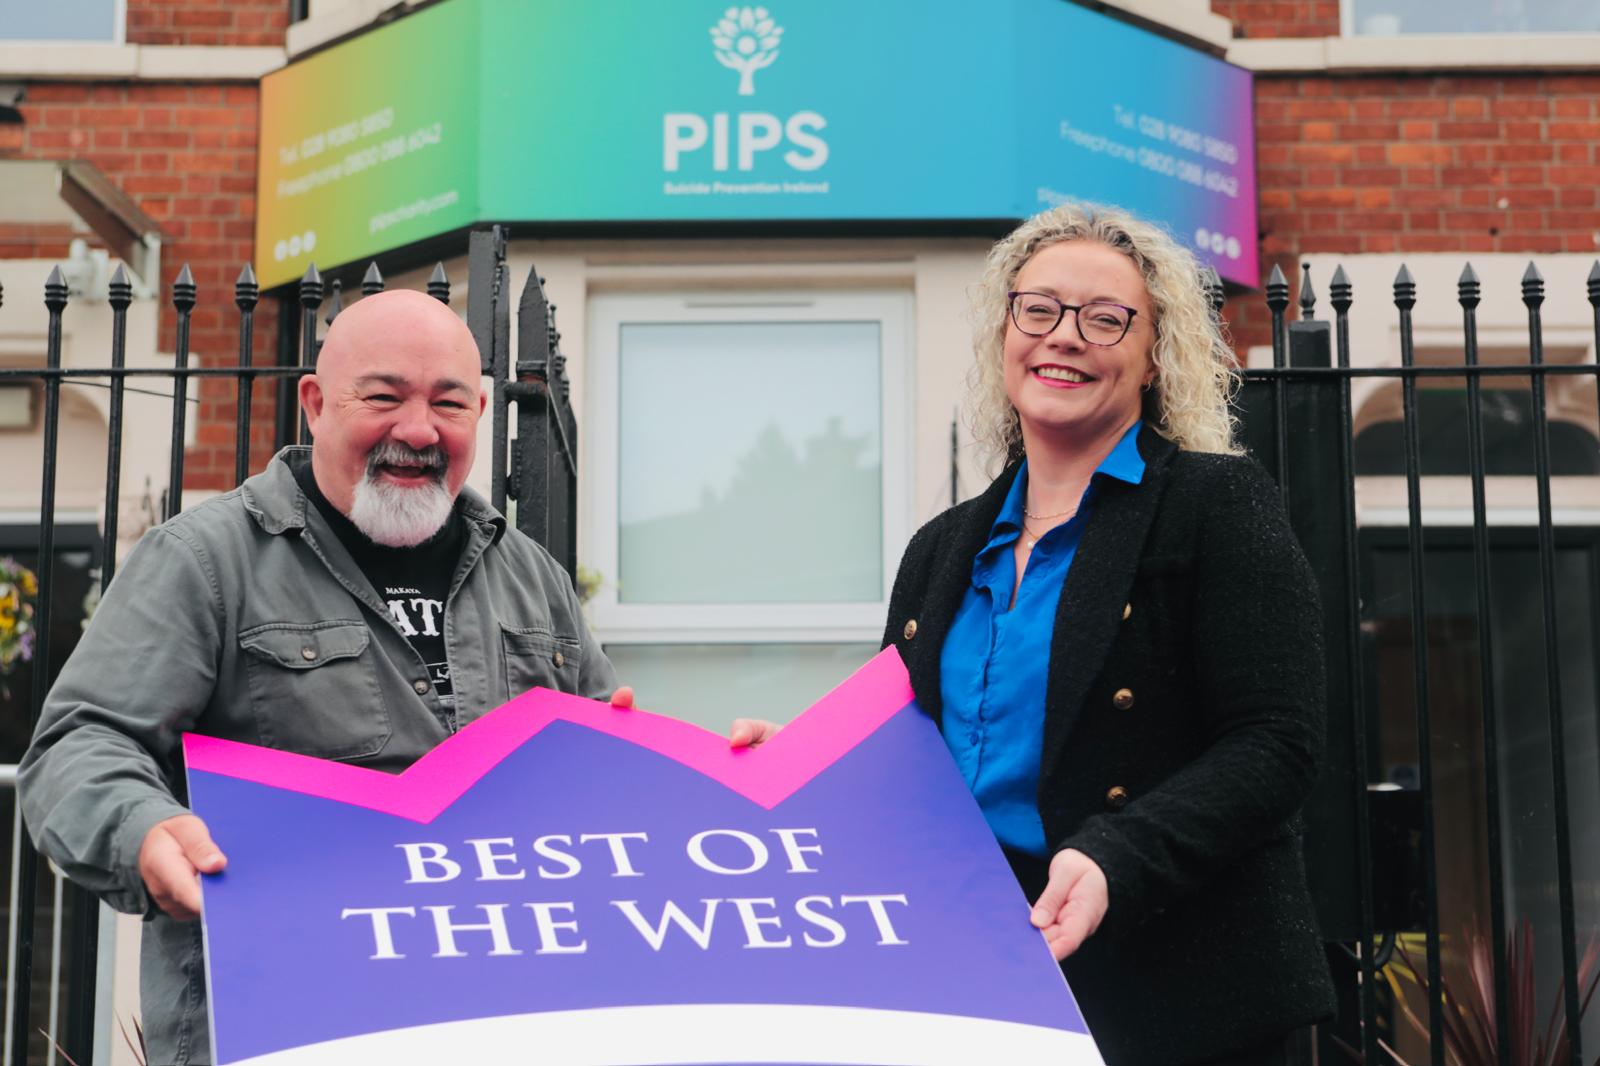 BEST OF THE WEST: Thomas McMullan from Belfast Media with Renee Quinn, Executive Director of PIPS Charity